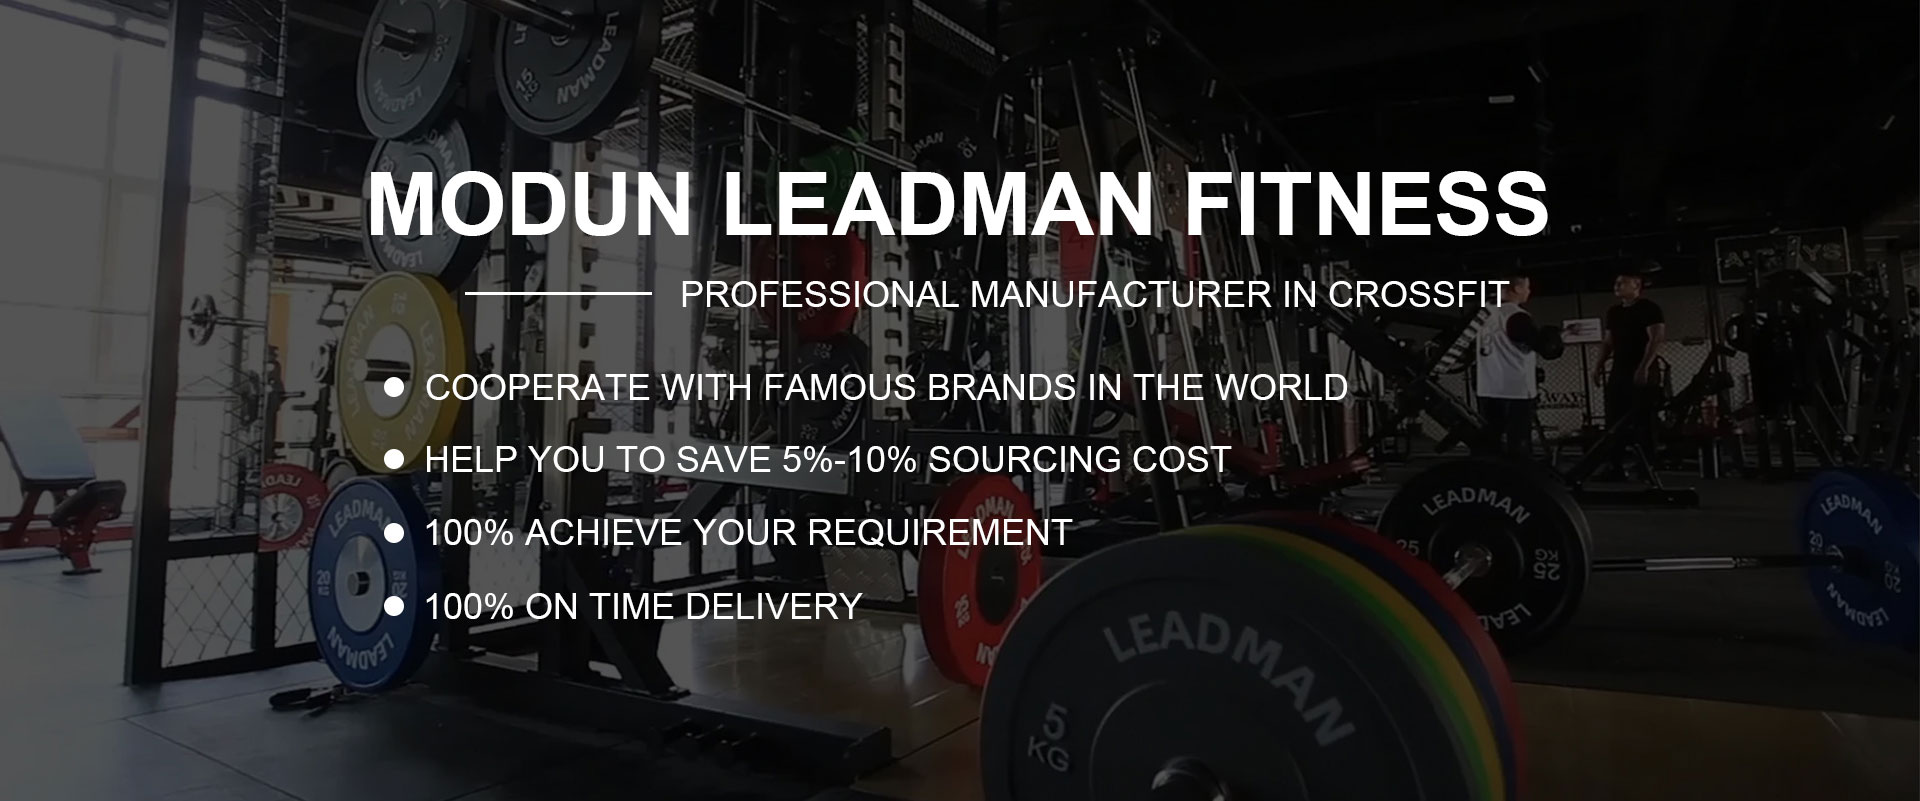 The Largest Fitness Equipment Manufacturers|Modun Leadman Fitness